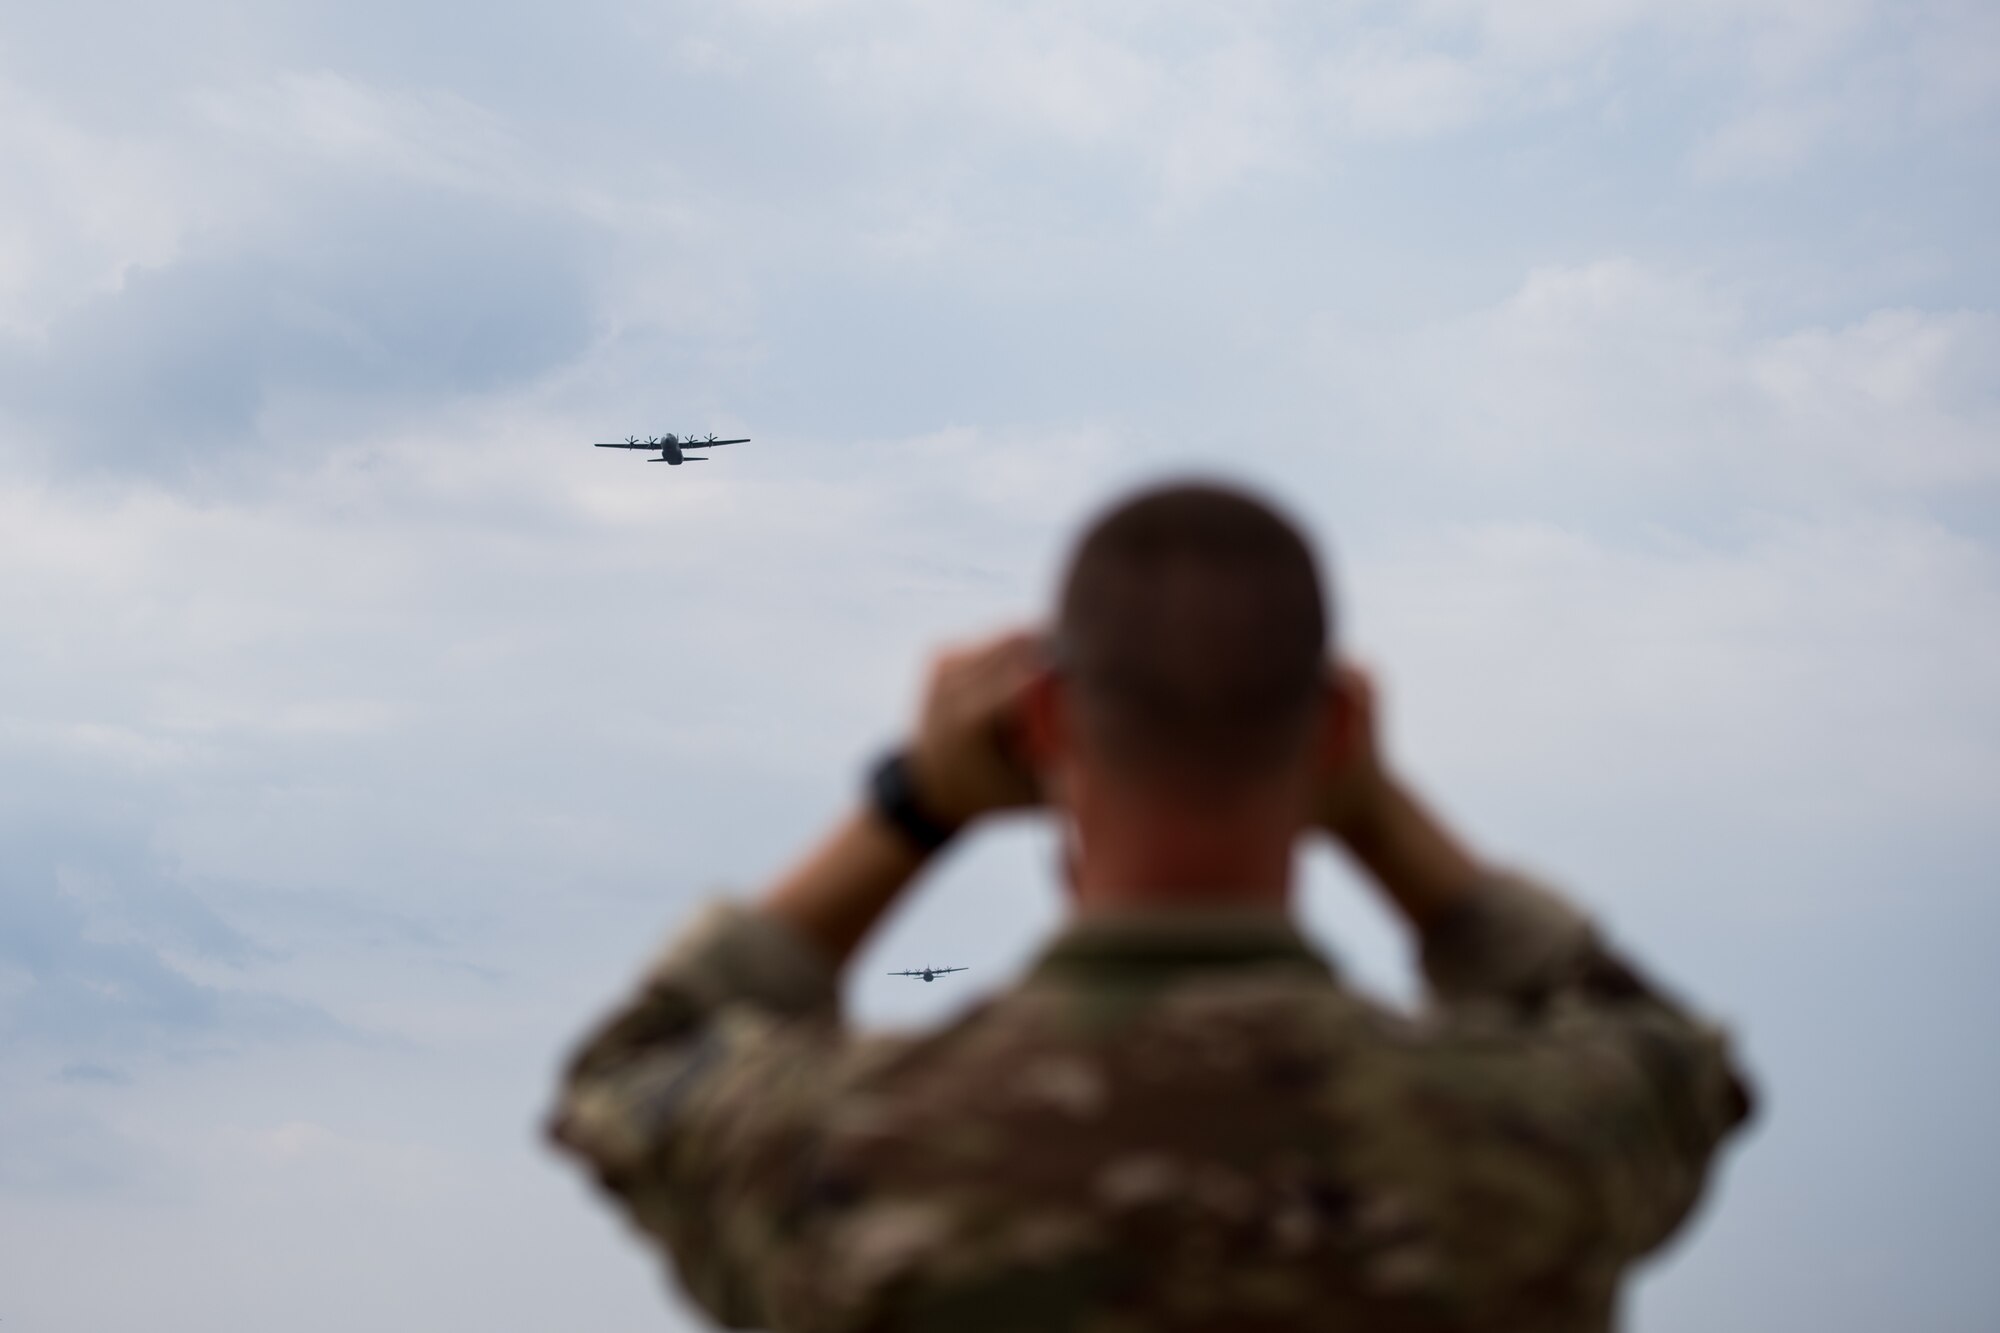 U.S. Air Force Tech. Sgt. Laramie Combs, 435th Contingency Response Squadron contingency airfield manager looks through his binoculars as C-130J Super Hercules aircraft assigned to the 37th Airlift Squadron, Ramstein Air Base, Germany, fly over Boboc Air Base, Romania, Aug. 23, 2018. Combs and his team provided ground support for the 37th AS as part of exercise Carpathian Summer 2018. (U.S. Air Force photo by Senior Airman Devin Boyer)